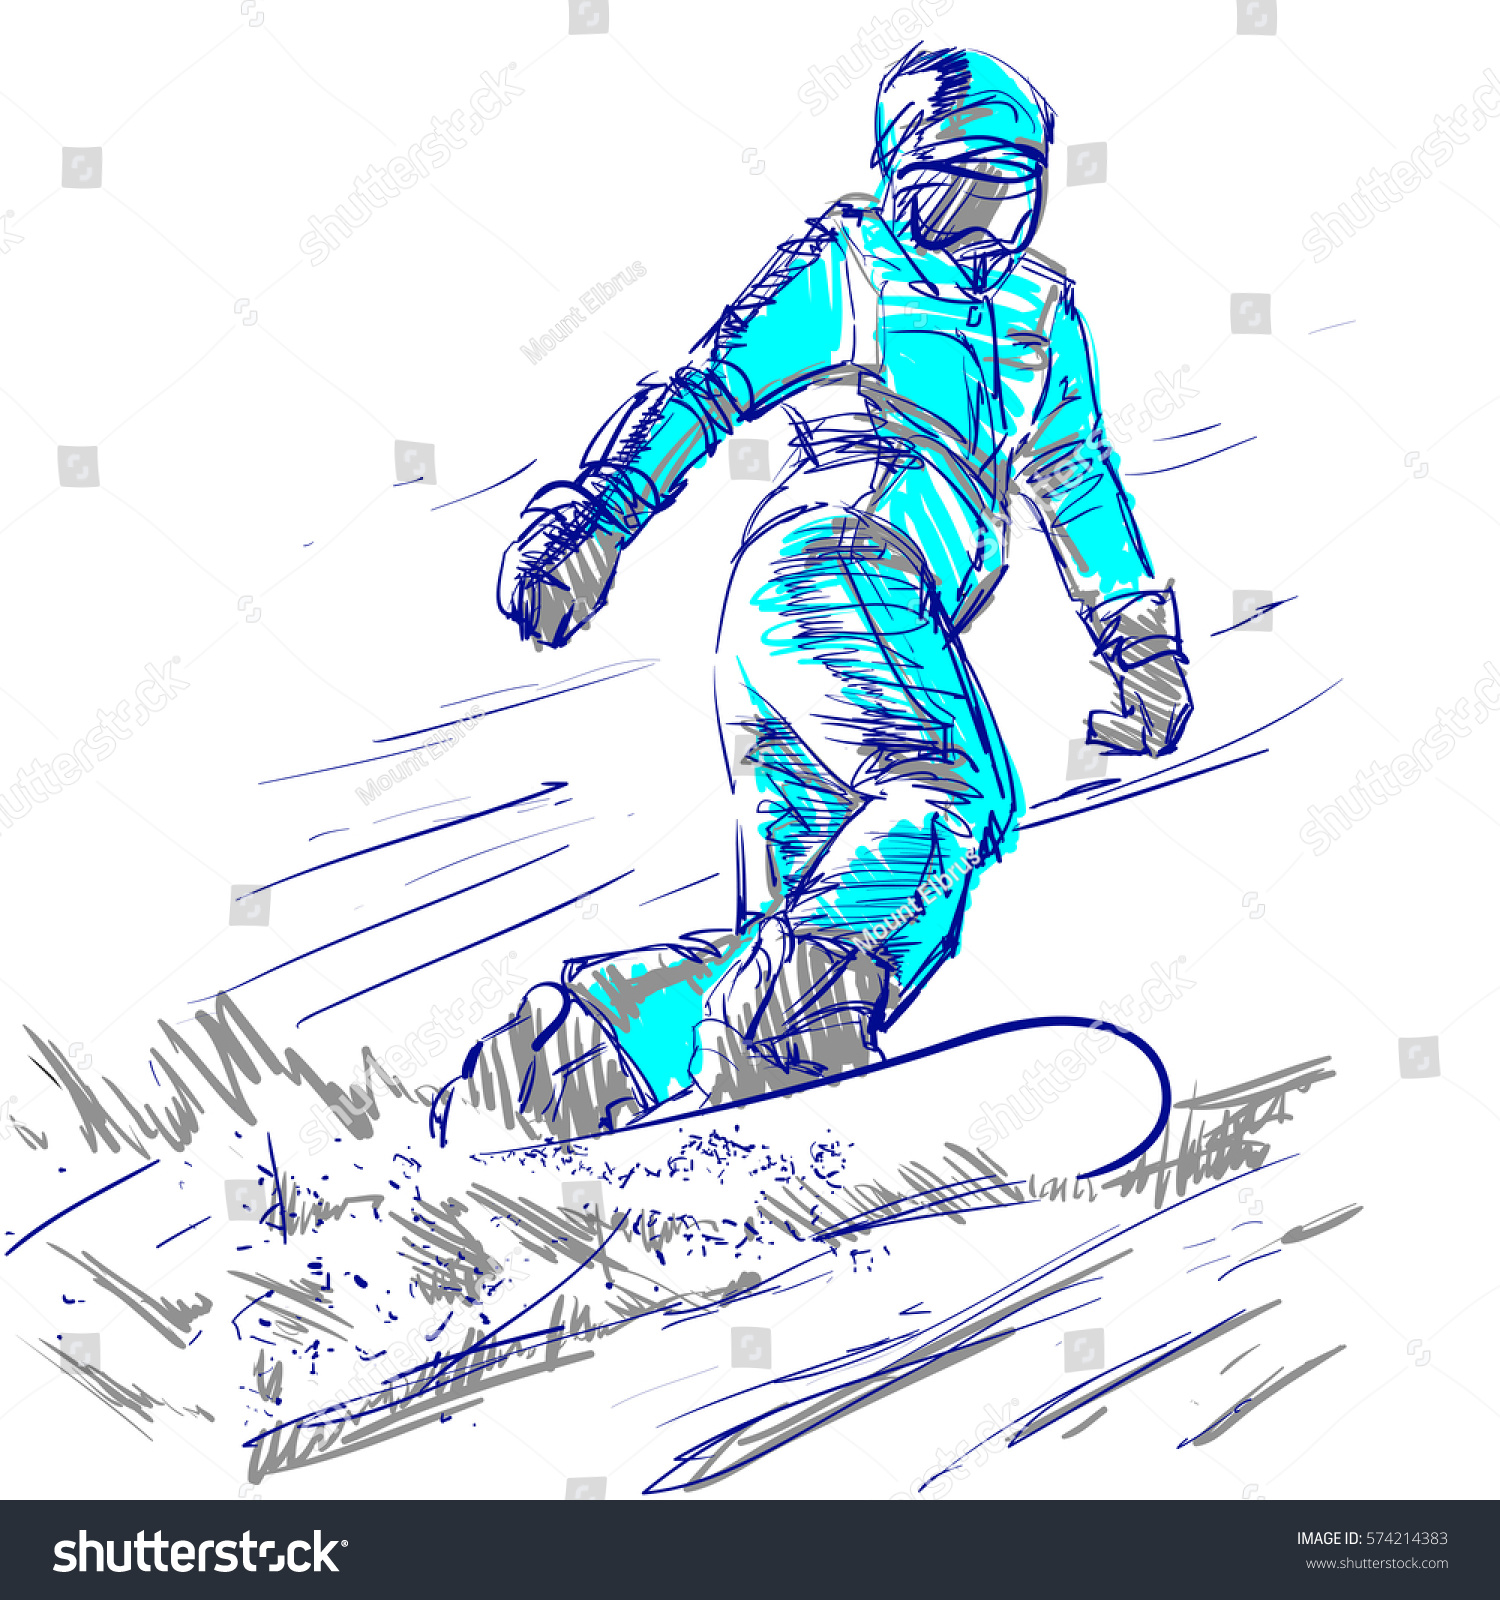 Sketch Snowboarder Woman On Slope Vector Stock Vector 574214383 ...